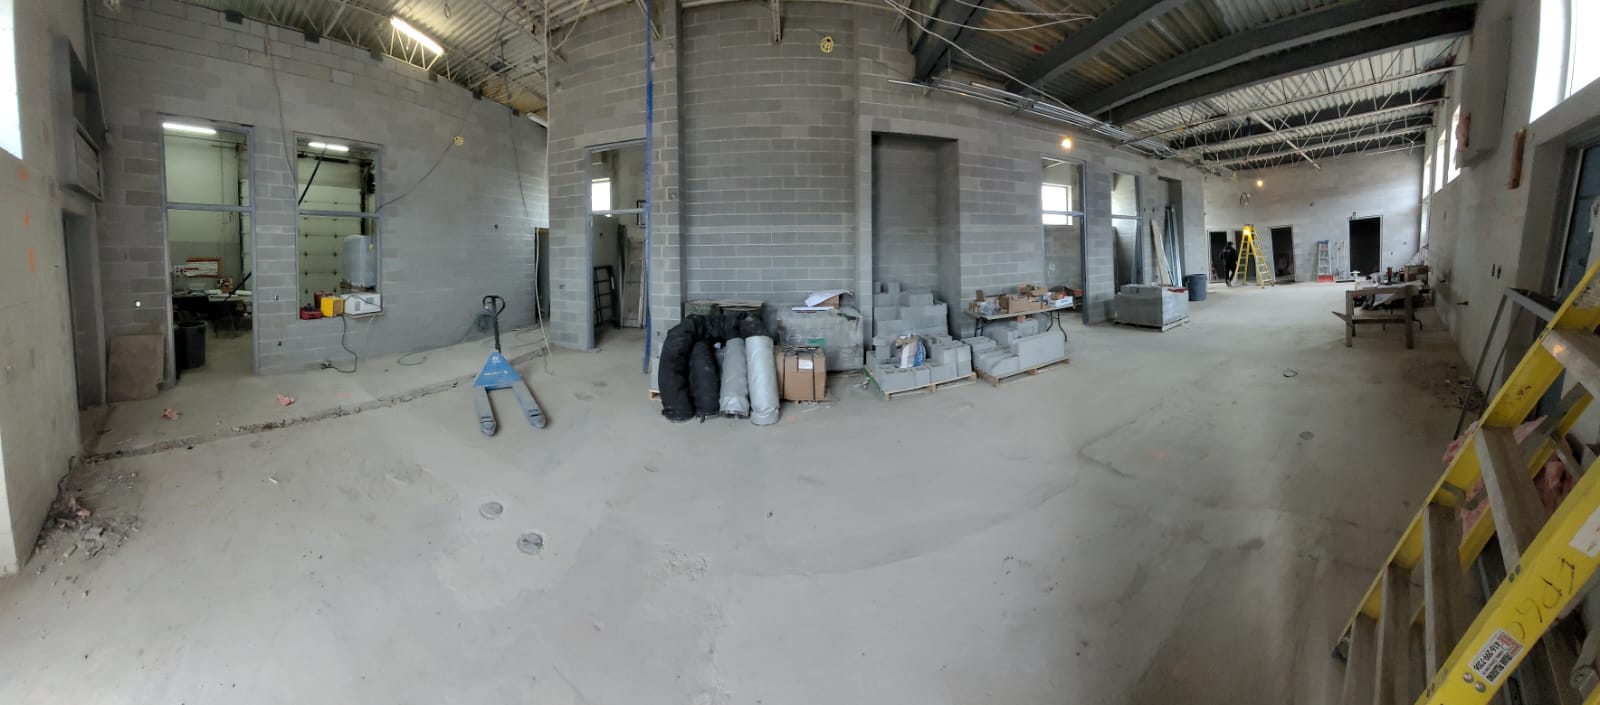 Grey cinderblock walls and door frames define an office space and other small rooms from the main clubhouse space. Ladders and other equipment and materials are scattered throughout the room on an unfinished cement floor.